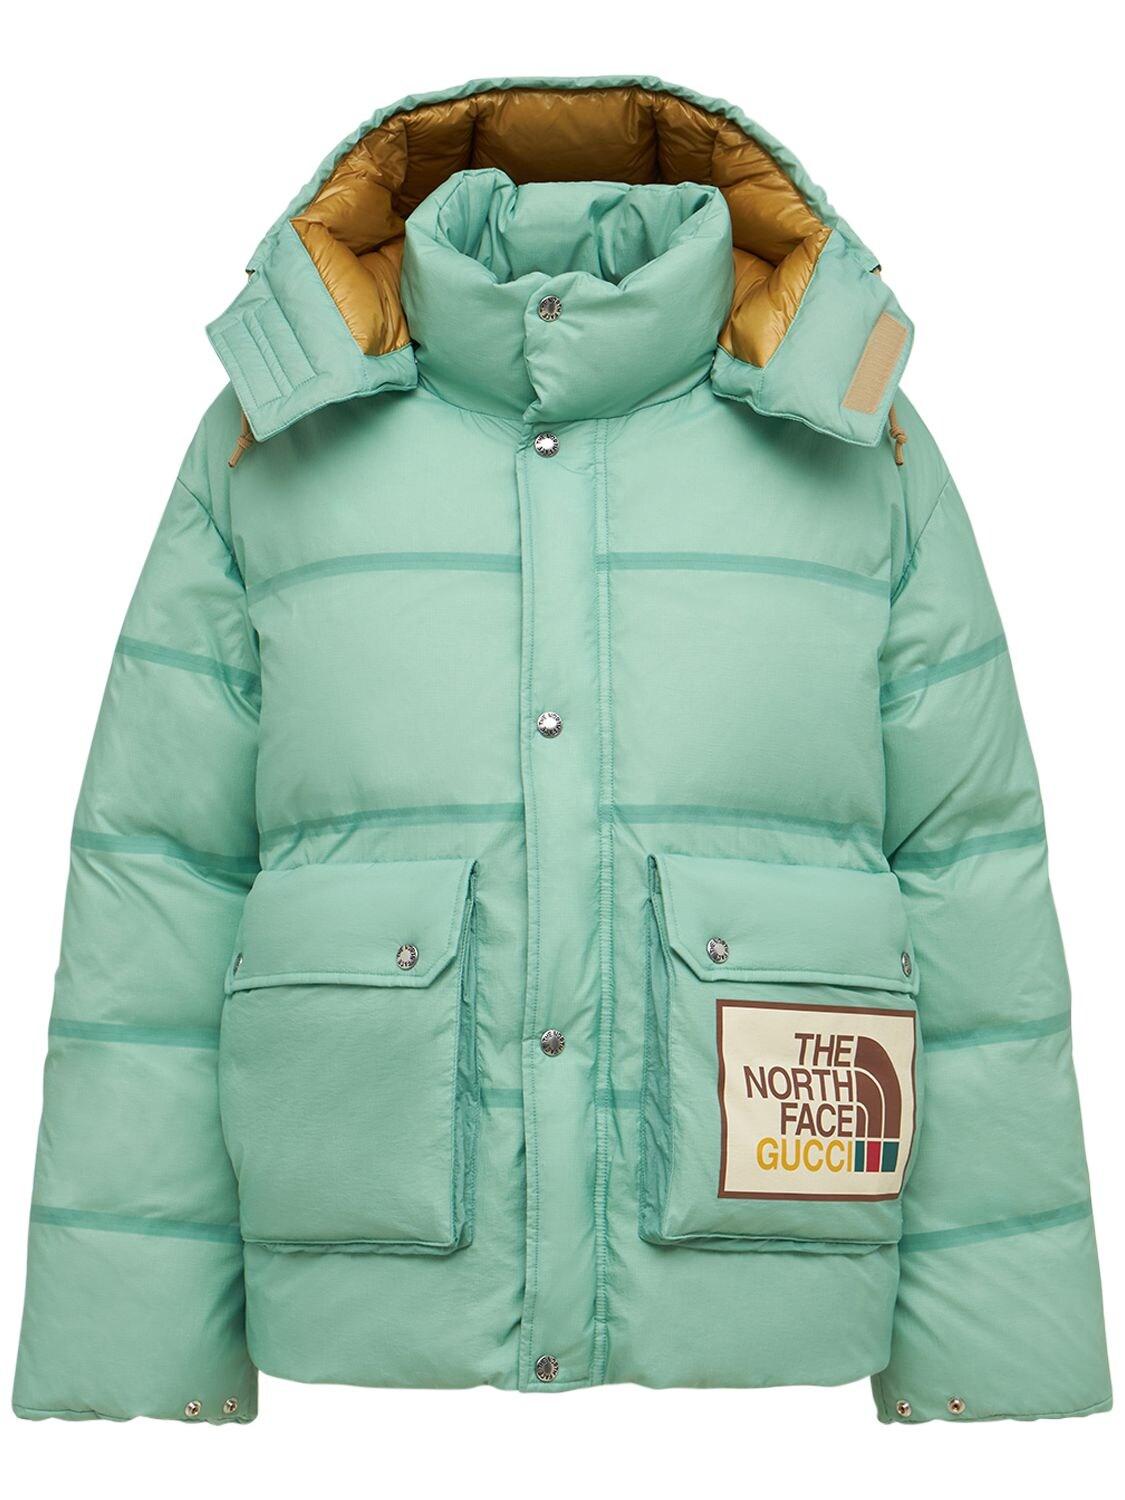 Jacket The North Face x Gucci Green size S International in Synthetic -  19703518